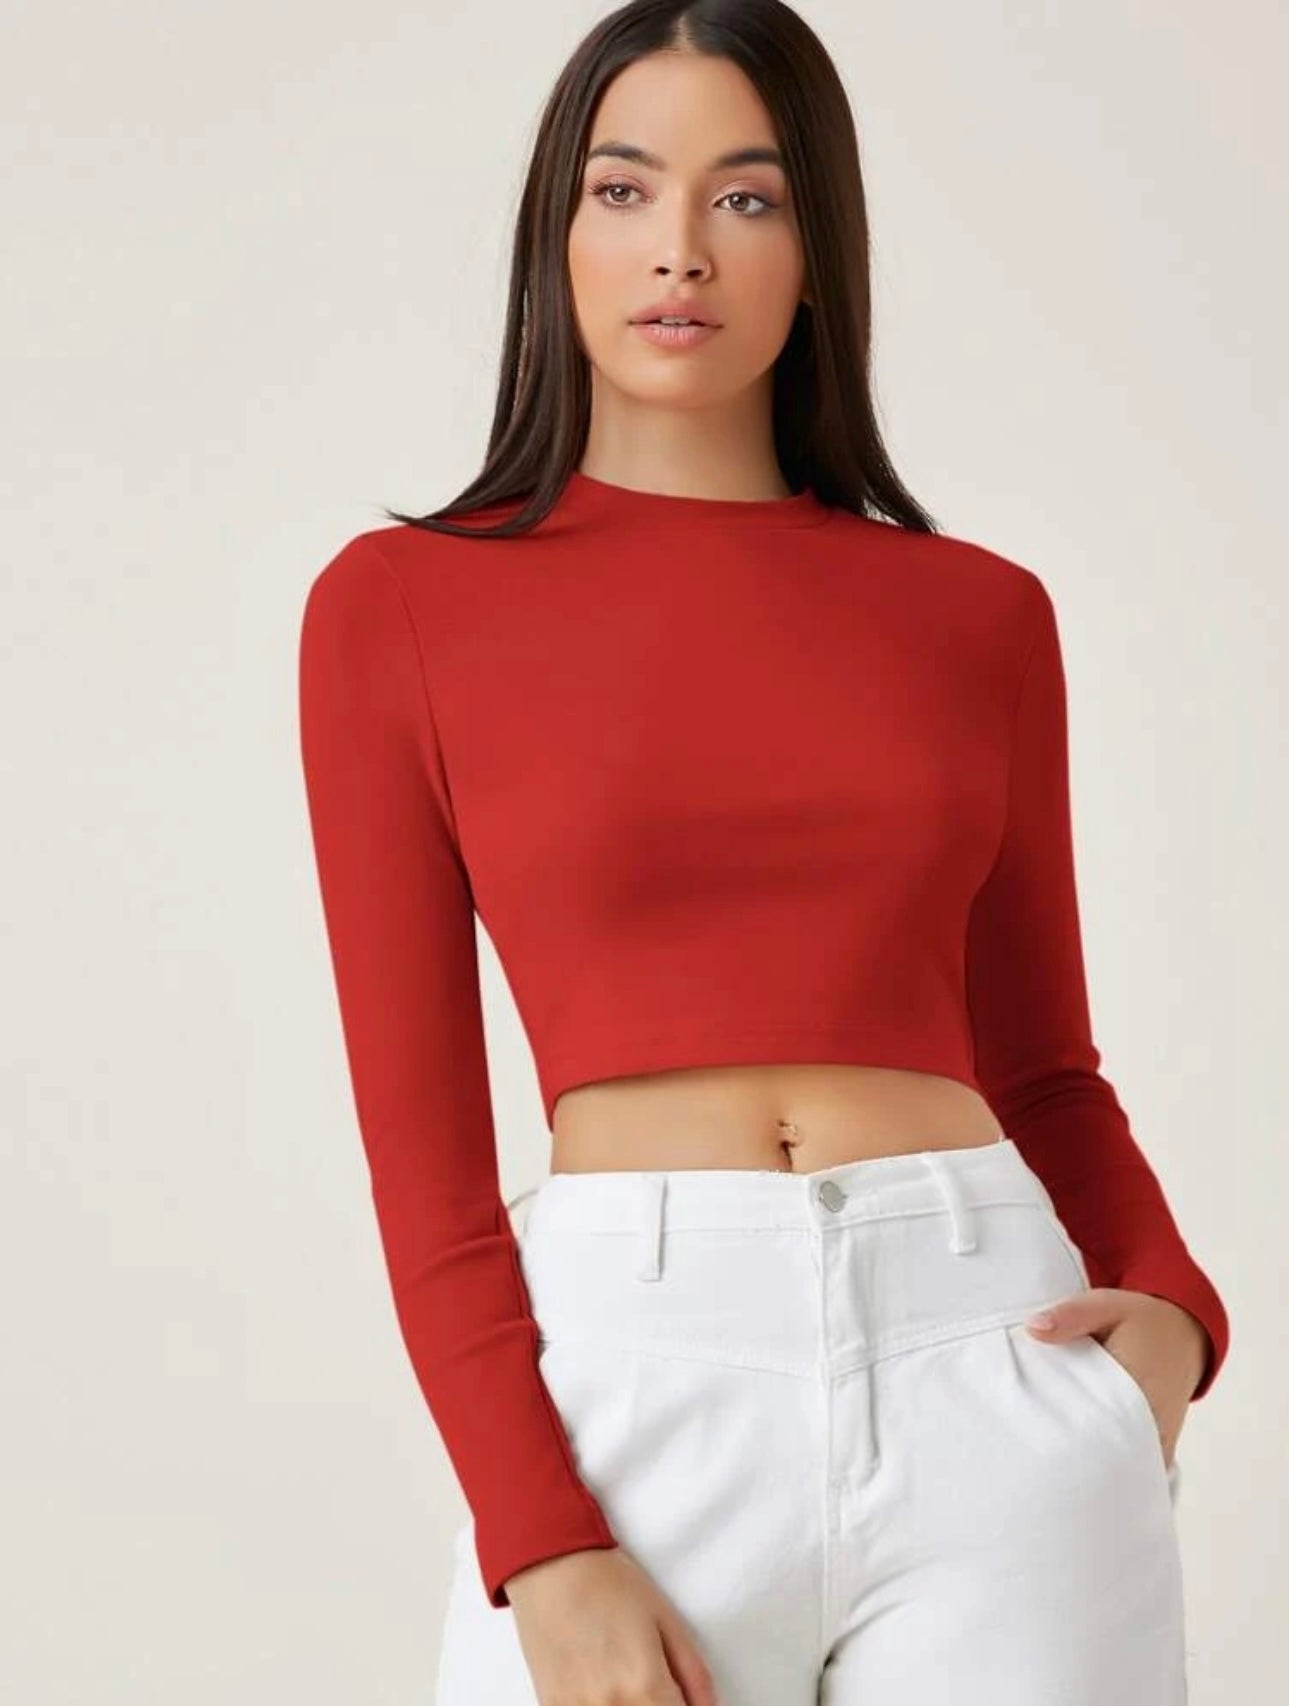 Teen Solid Red Slim Fitted Crop Top